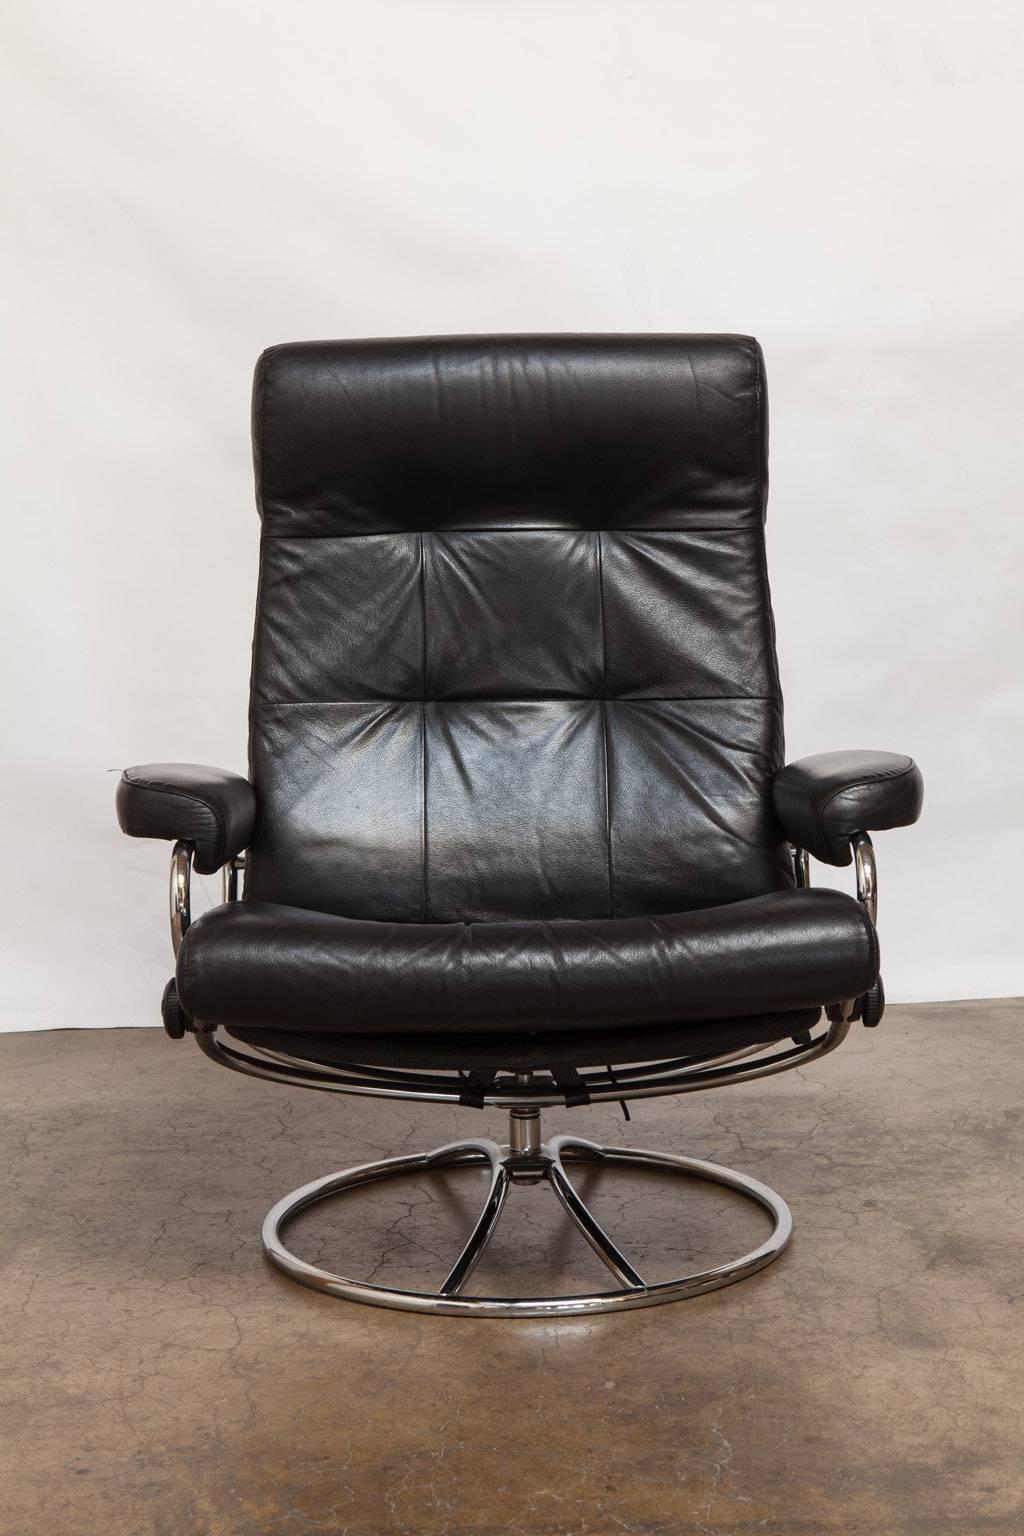 Mid-Cenury Modern Ekornes stressless black leather reclining lounge chair and ottoman featuring a chrome frame. Stressless recliners are made by Ekornes in Norway and are the finest recliners made. The chair has a unique glide system that follows